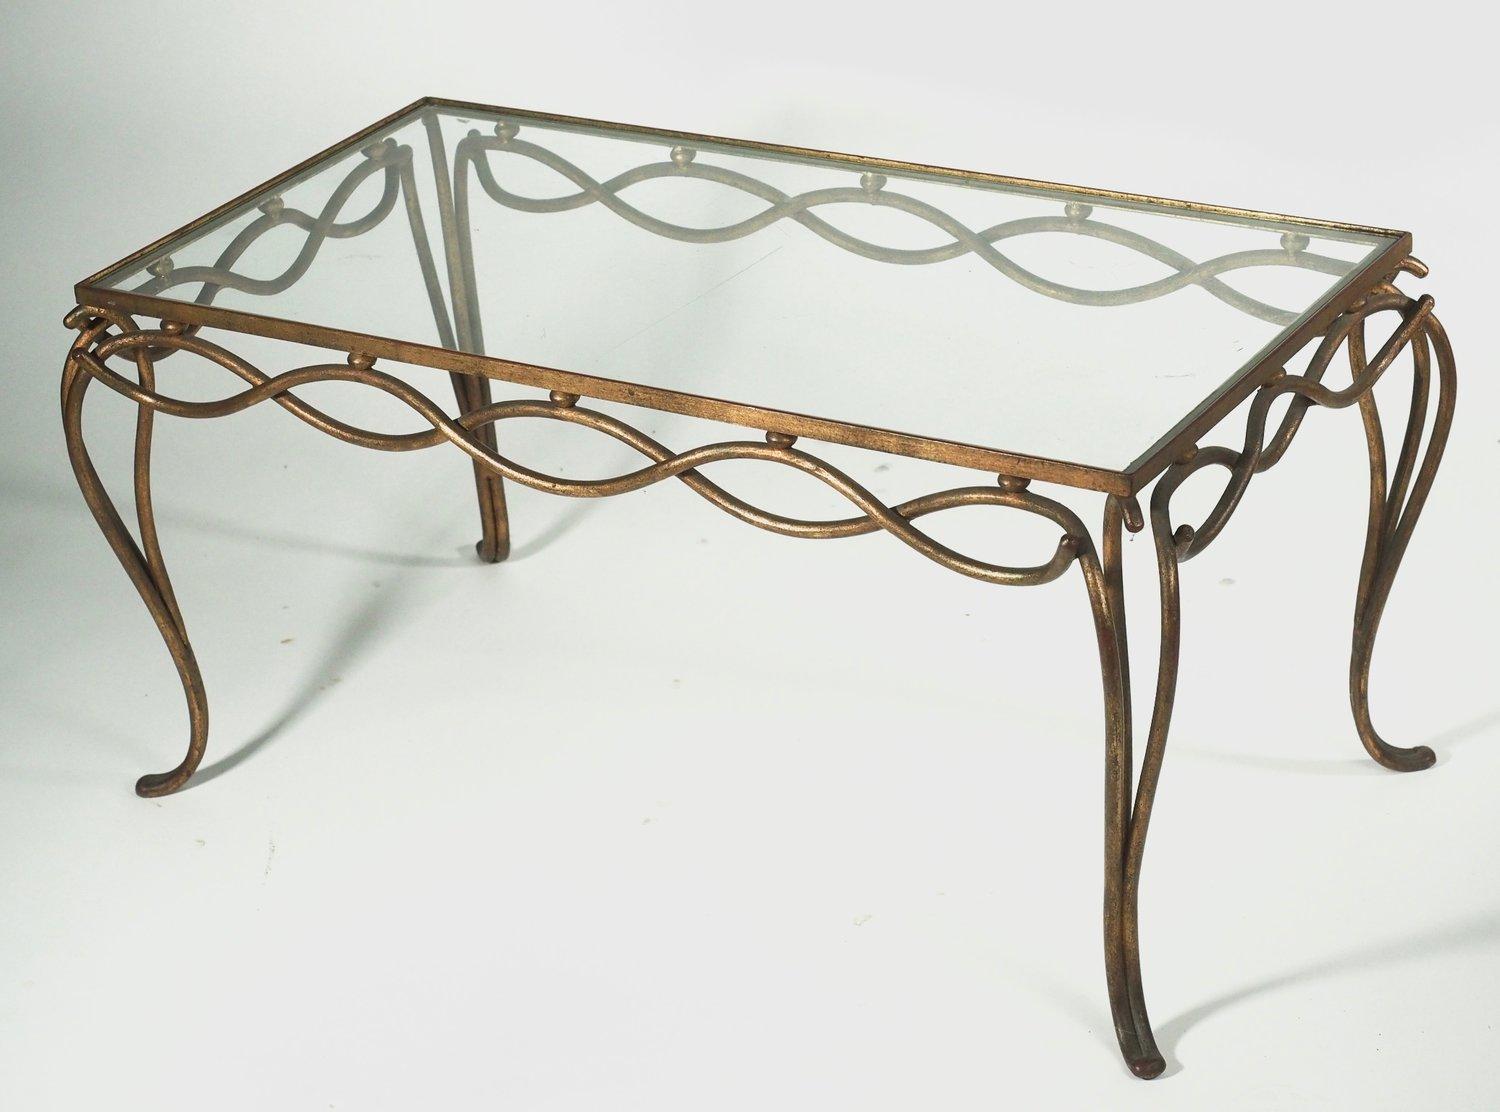 French 1940s Art Deco coffee table in gilt forged iron by Rene Drouet. Takes glass inset top.

 